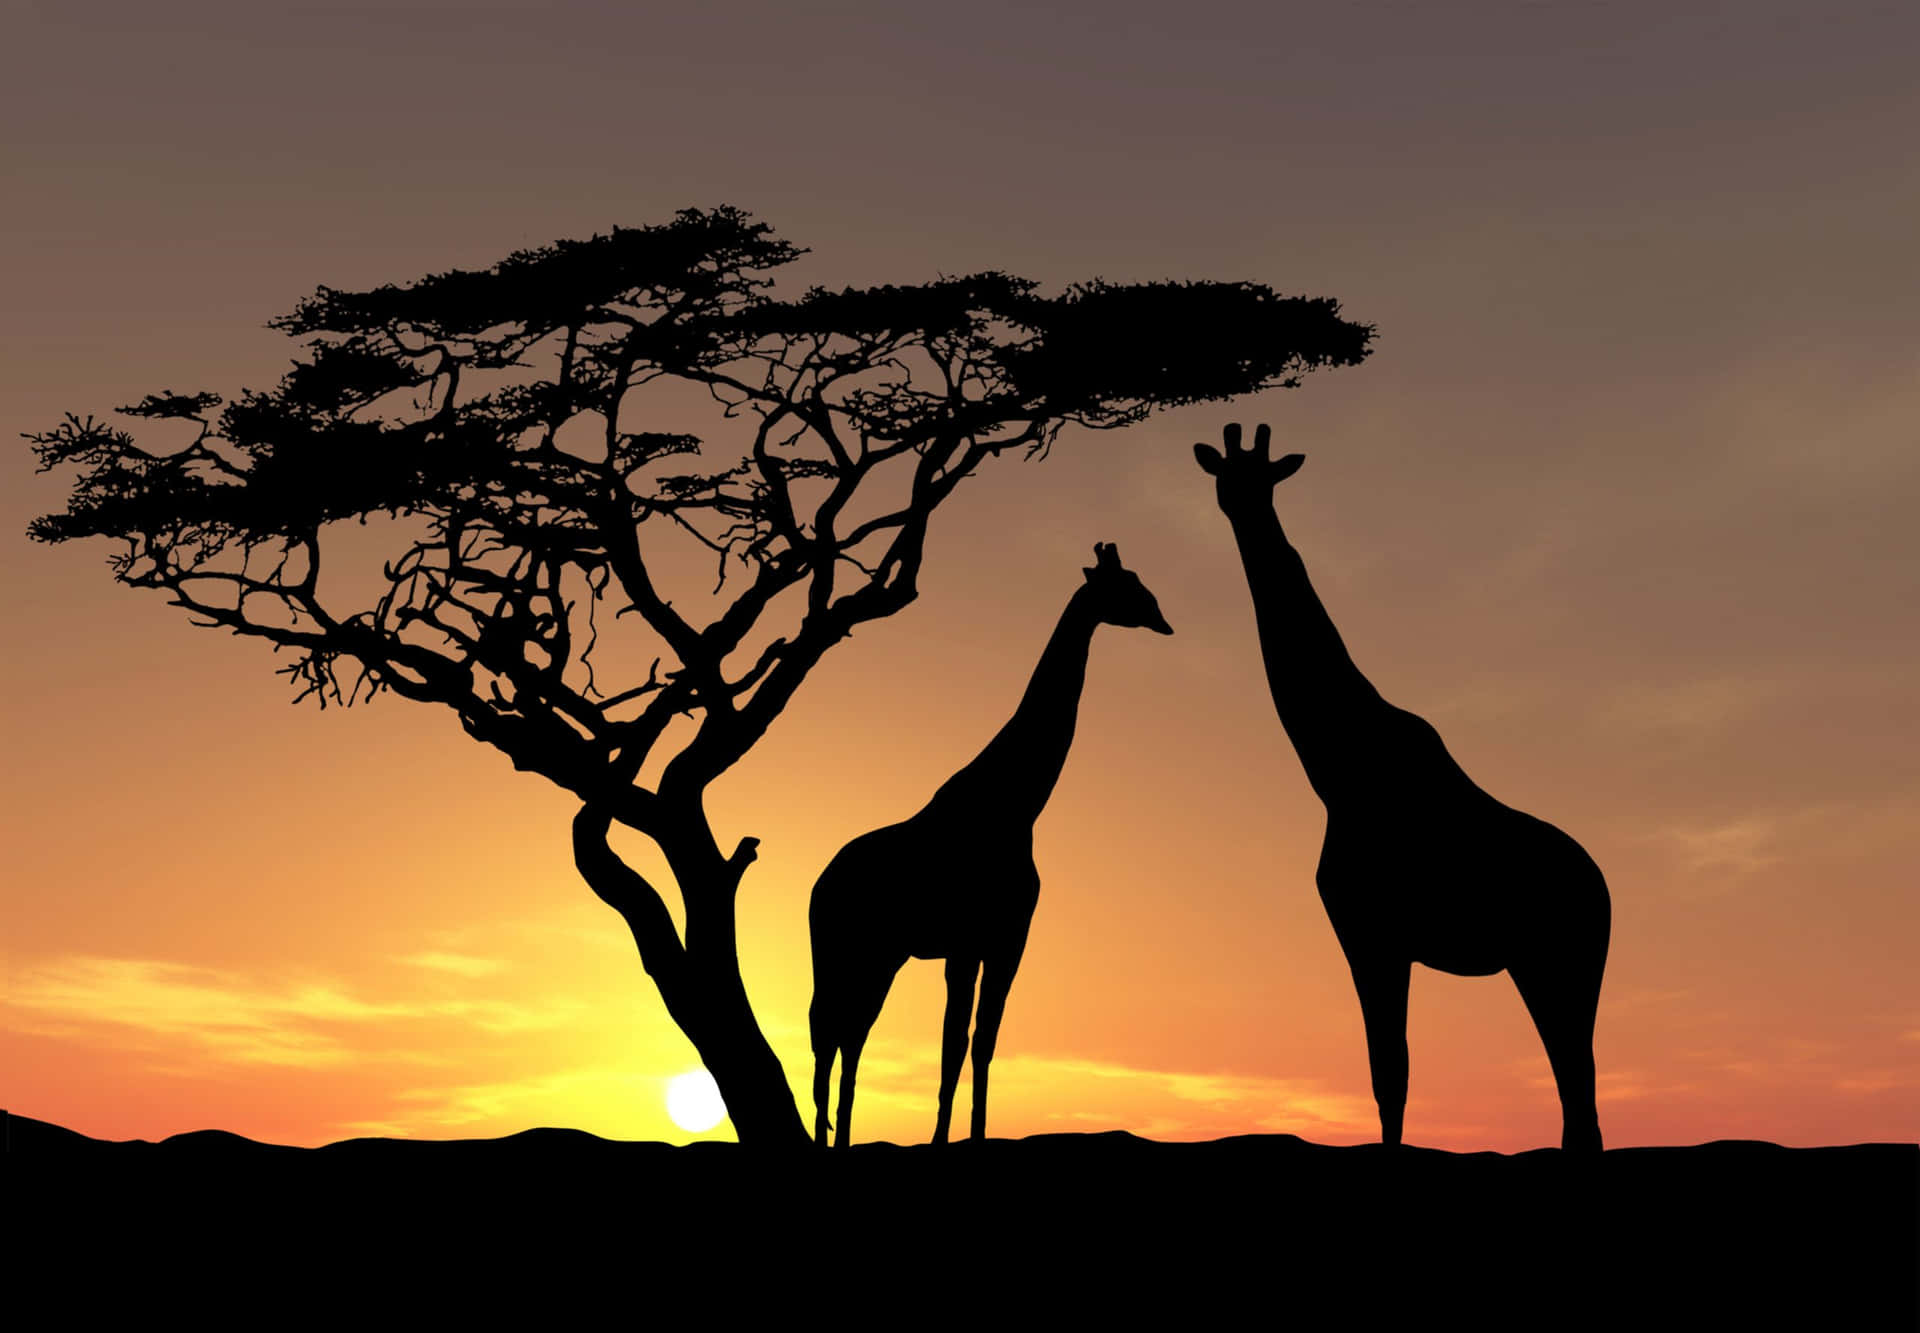 Caption: "A vibrant display of African wildlife at sunset" Wallpaper